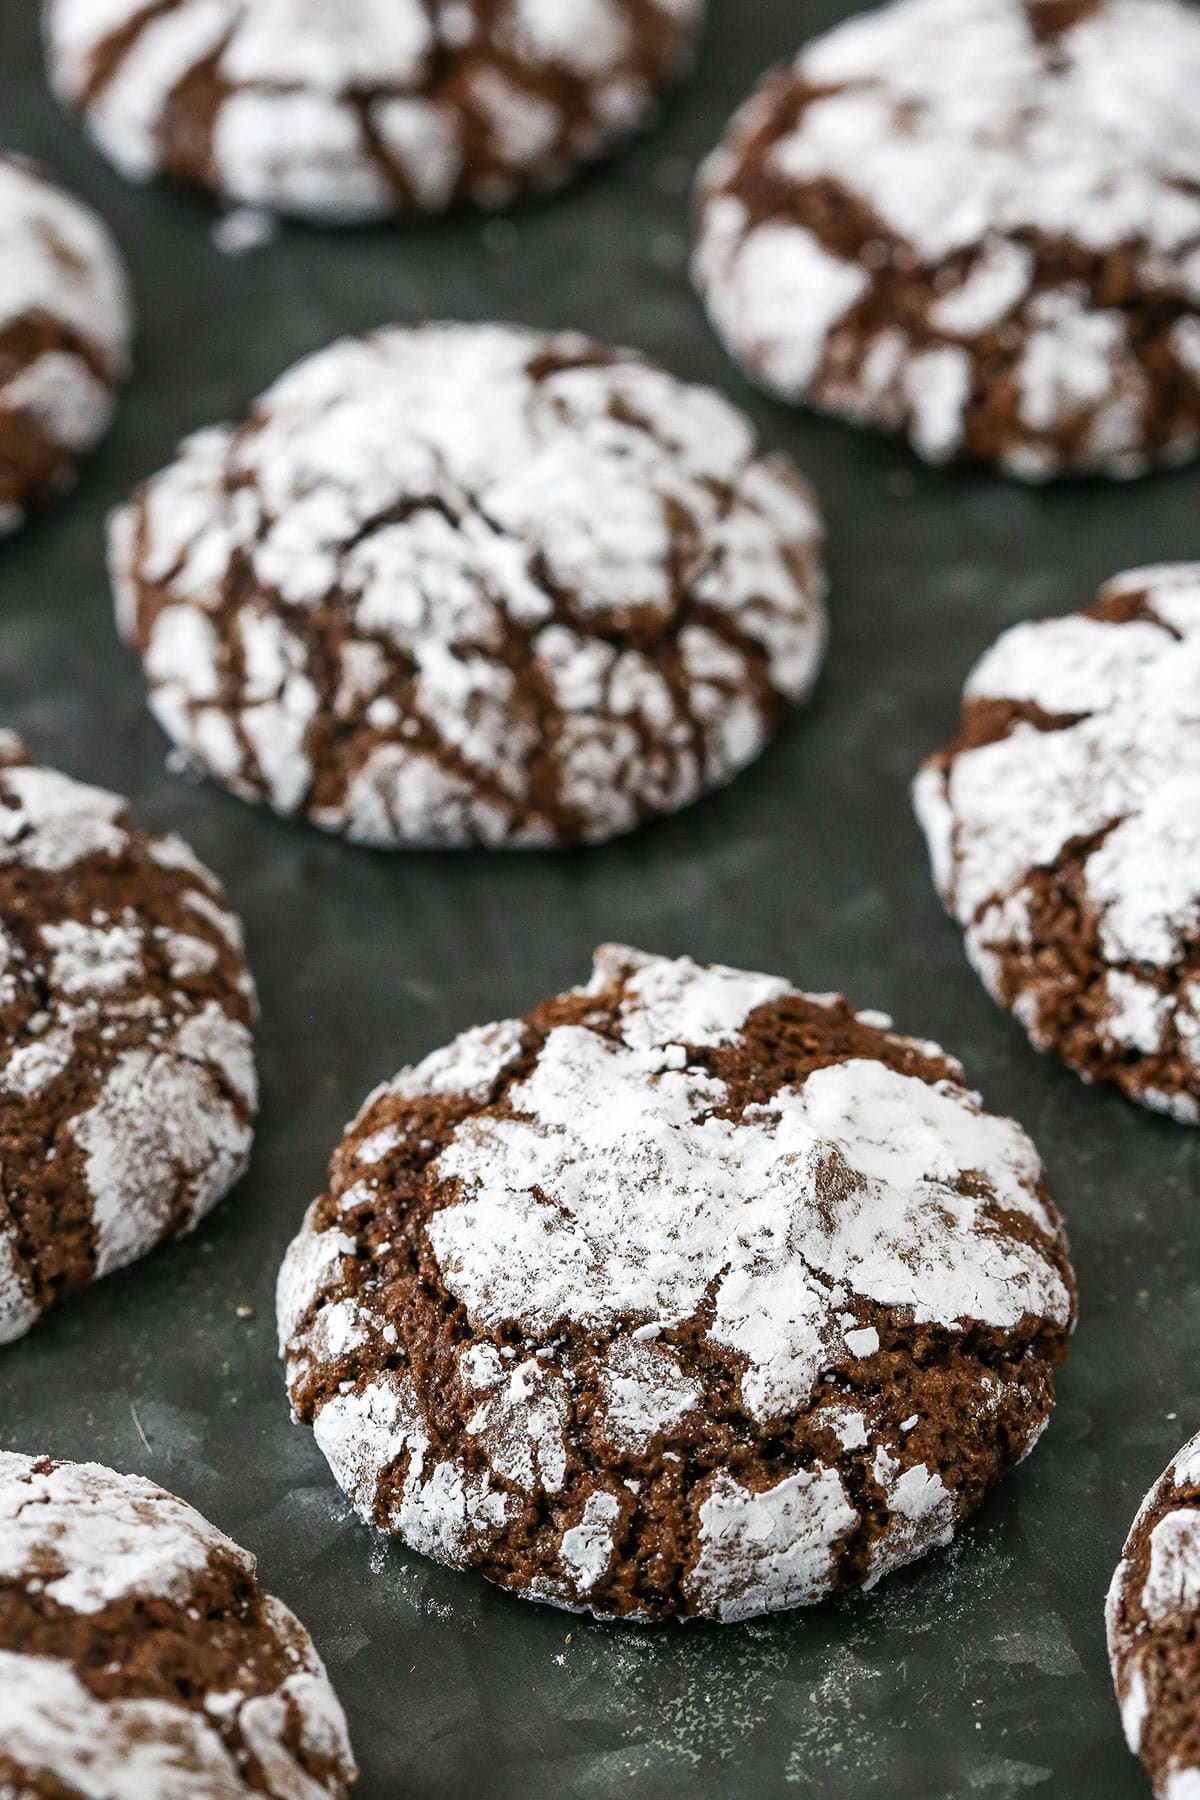 Chocolate crinkle cookies on a gray surface.